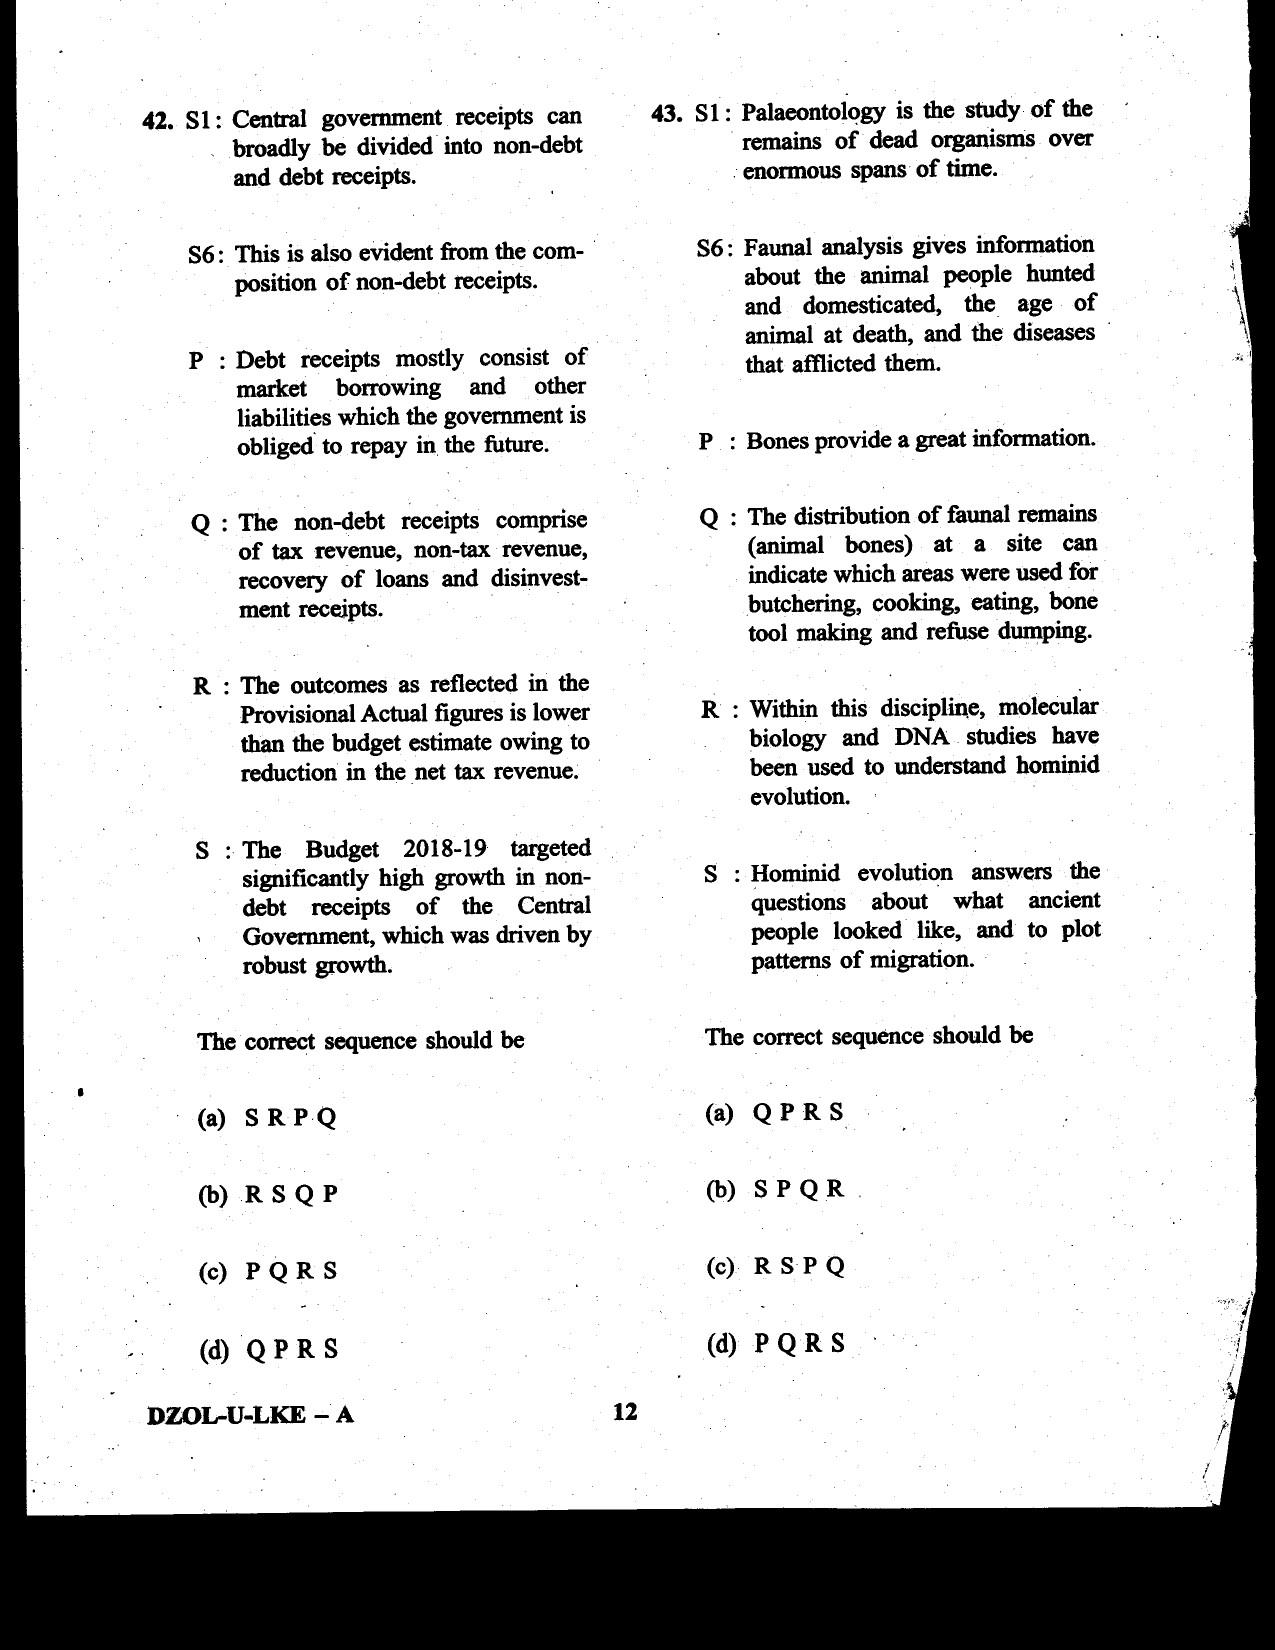 CDS II Examination 2020 English Question Paper - Image 12